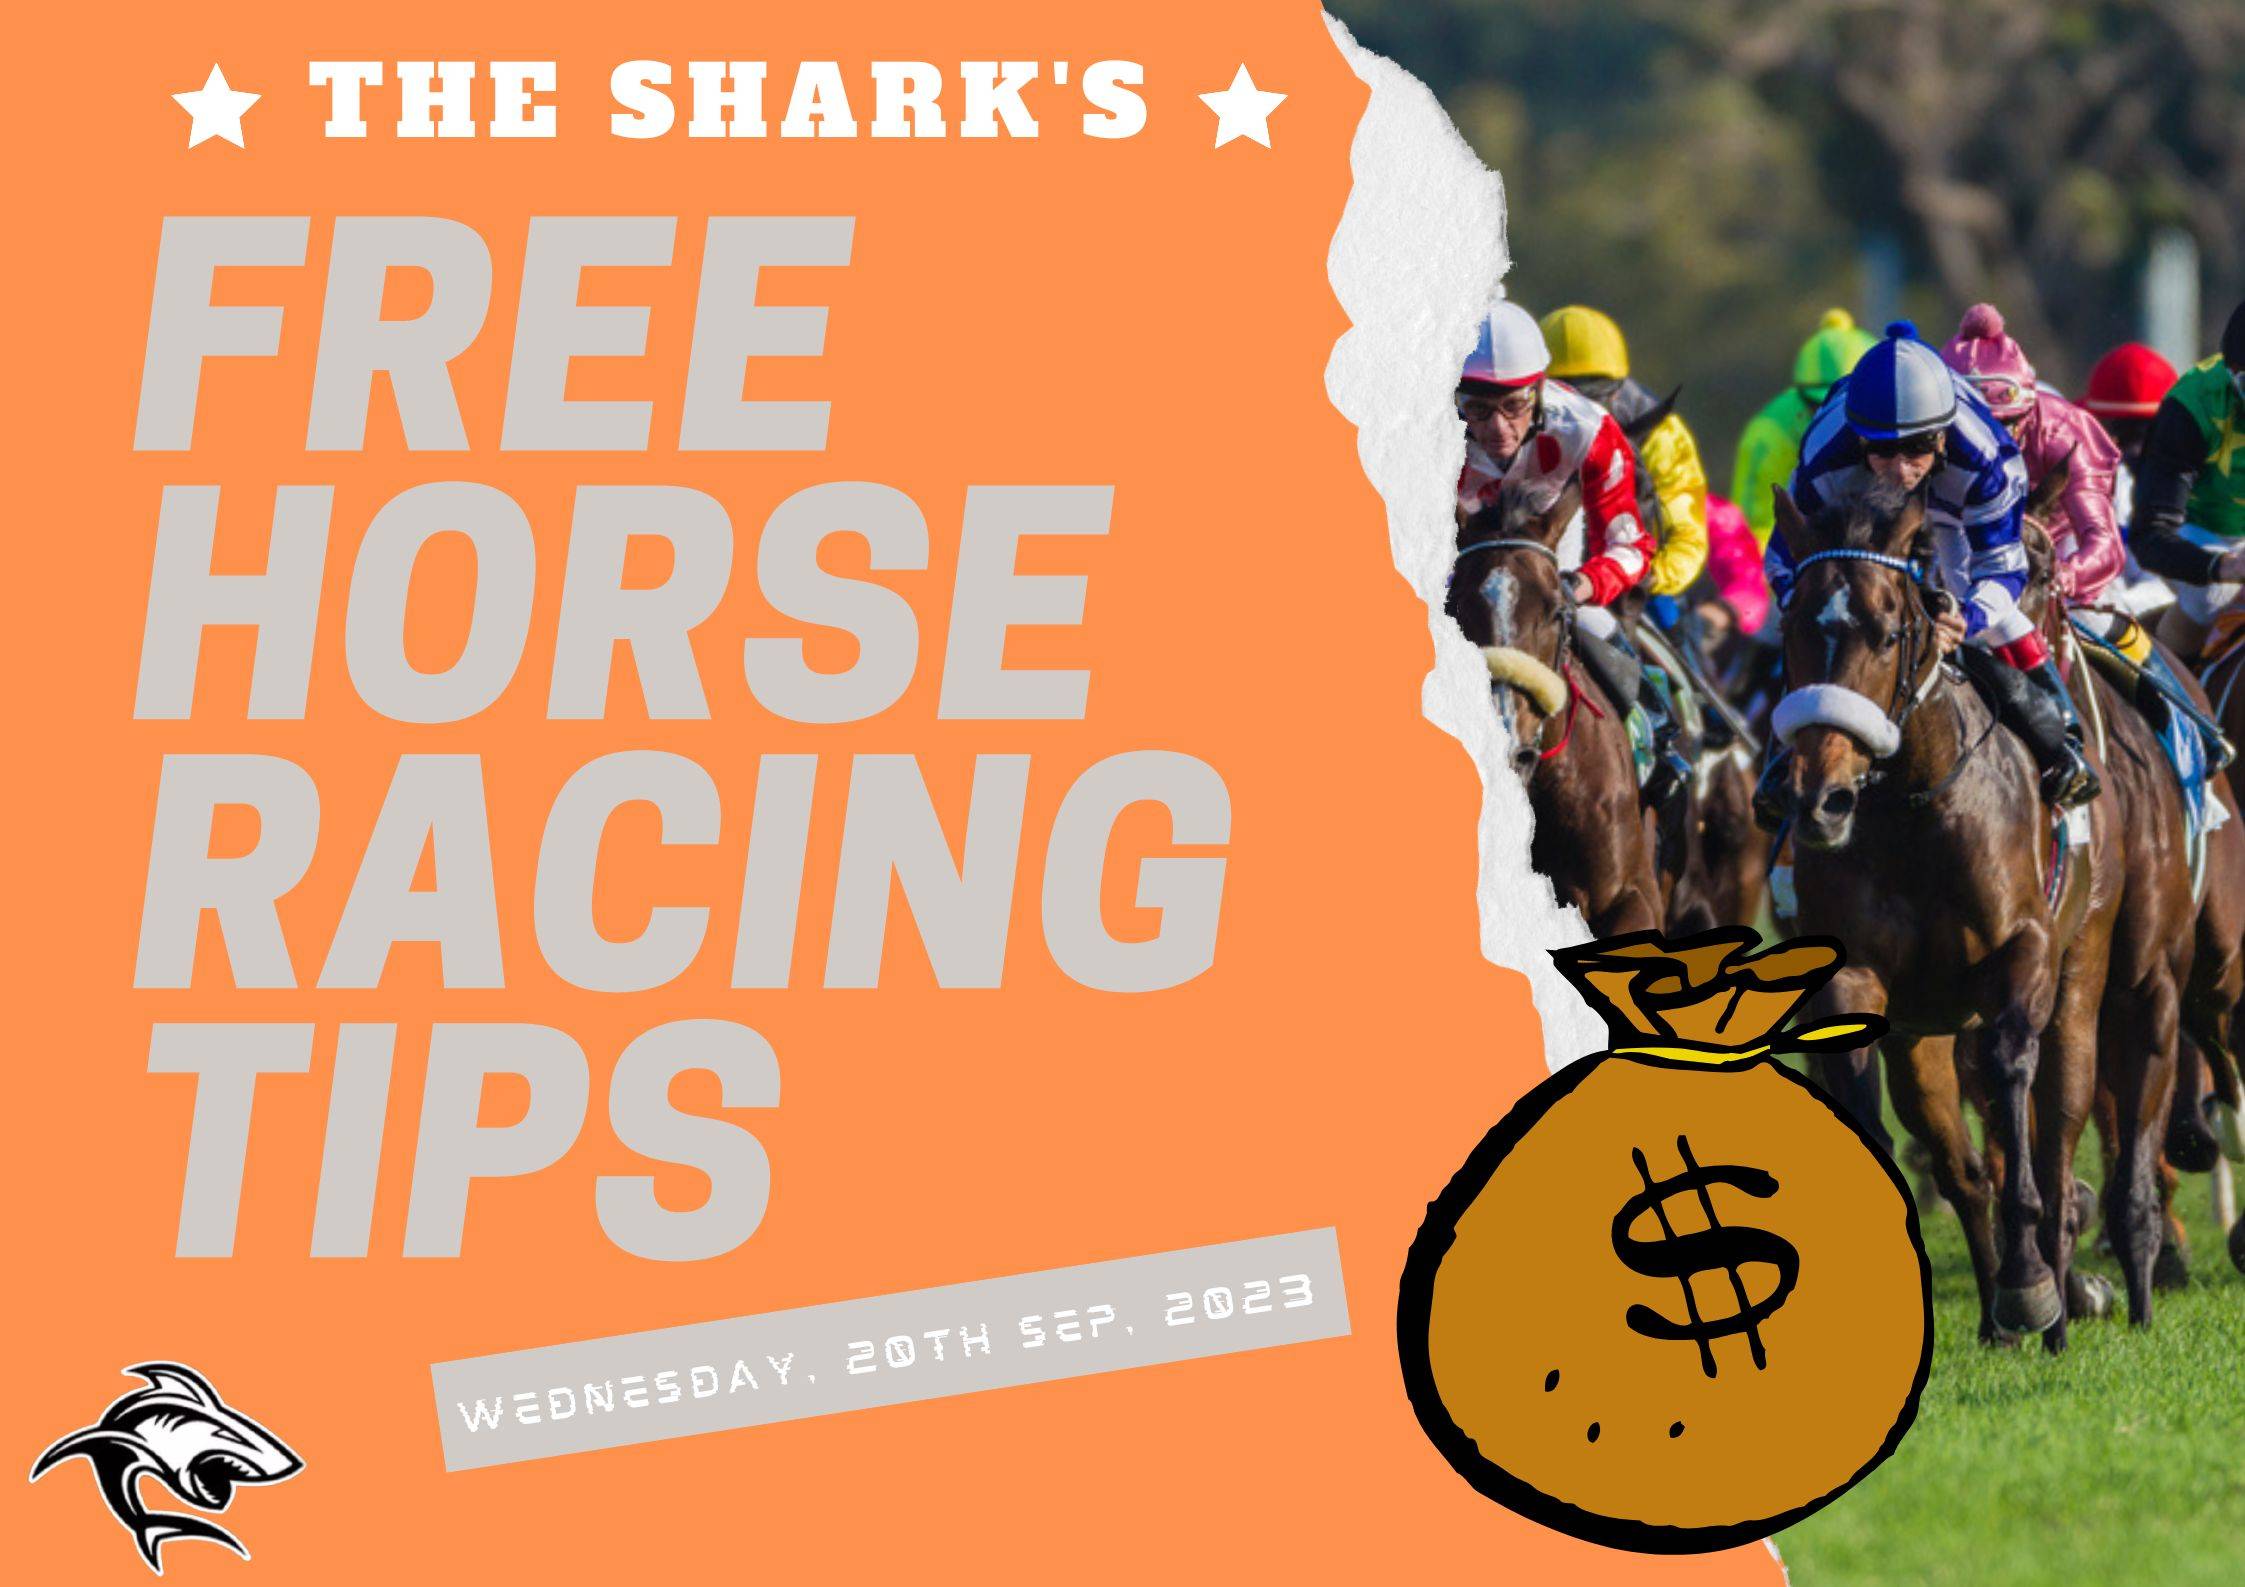 Free Horse Racing Tips - 20th Sep